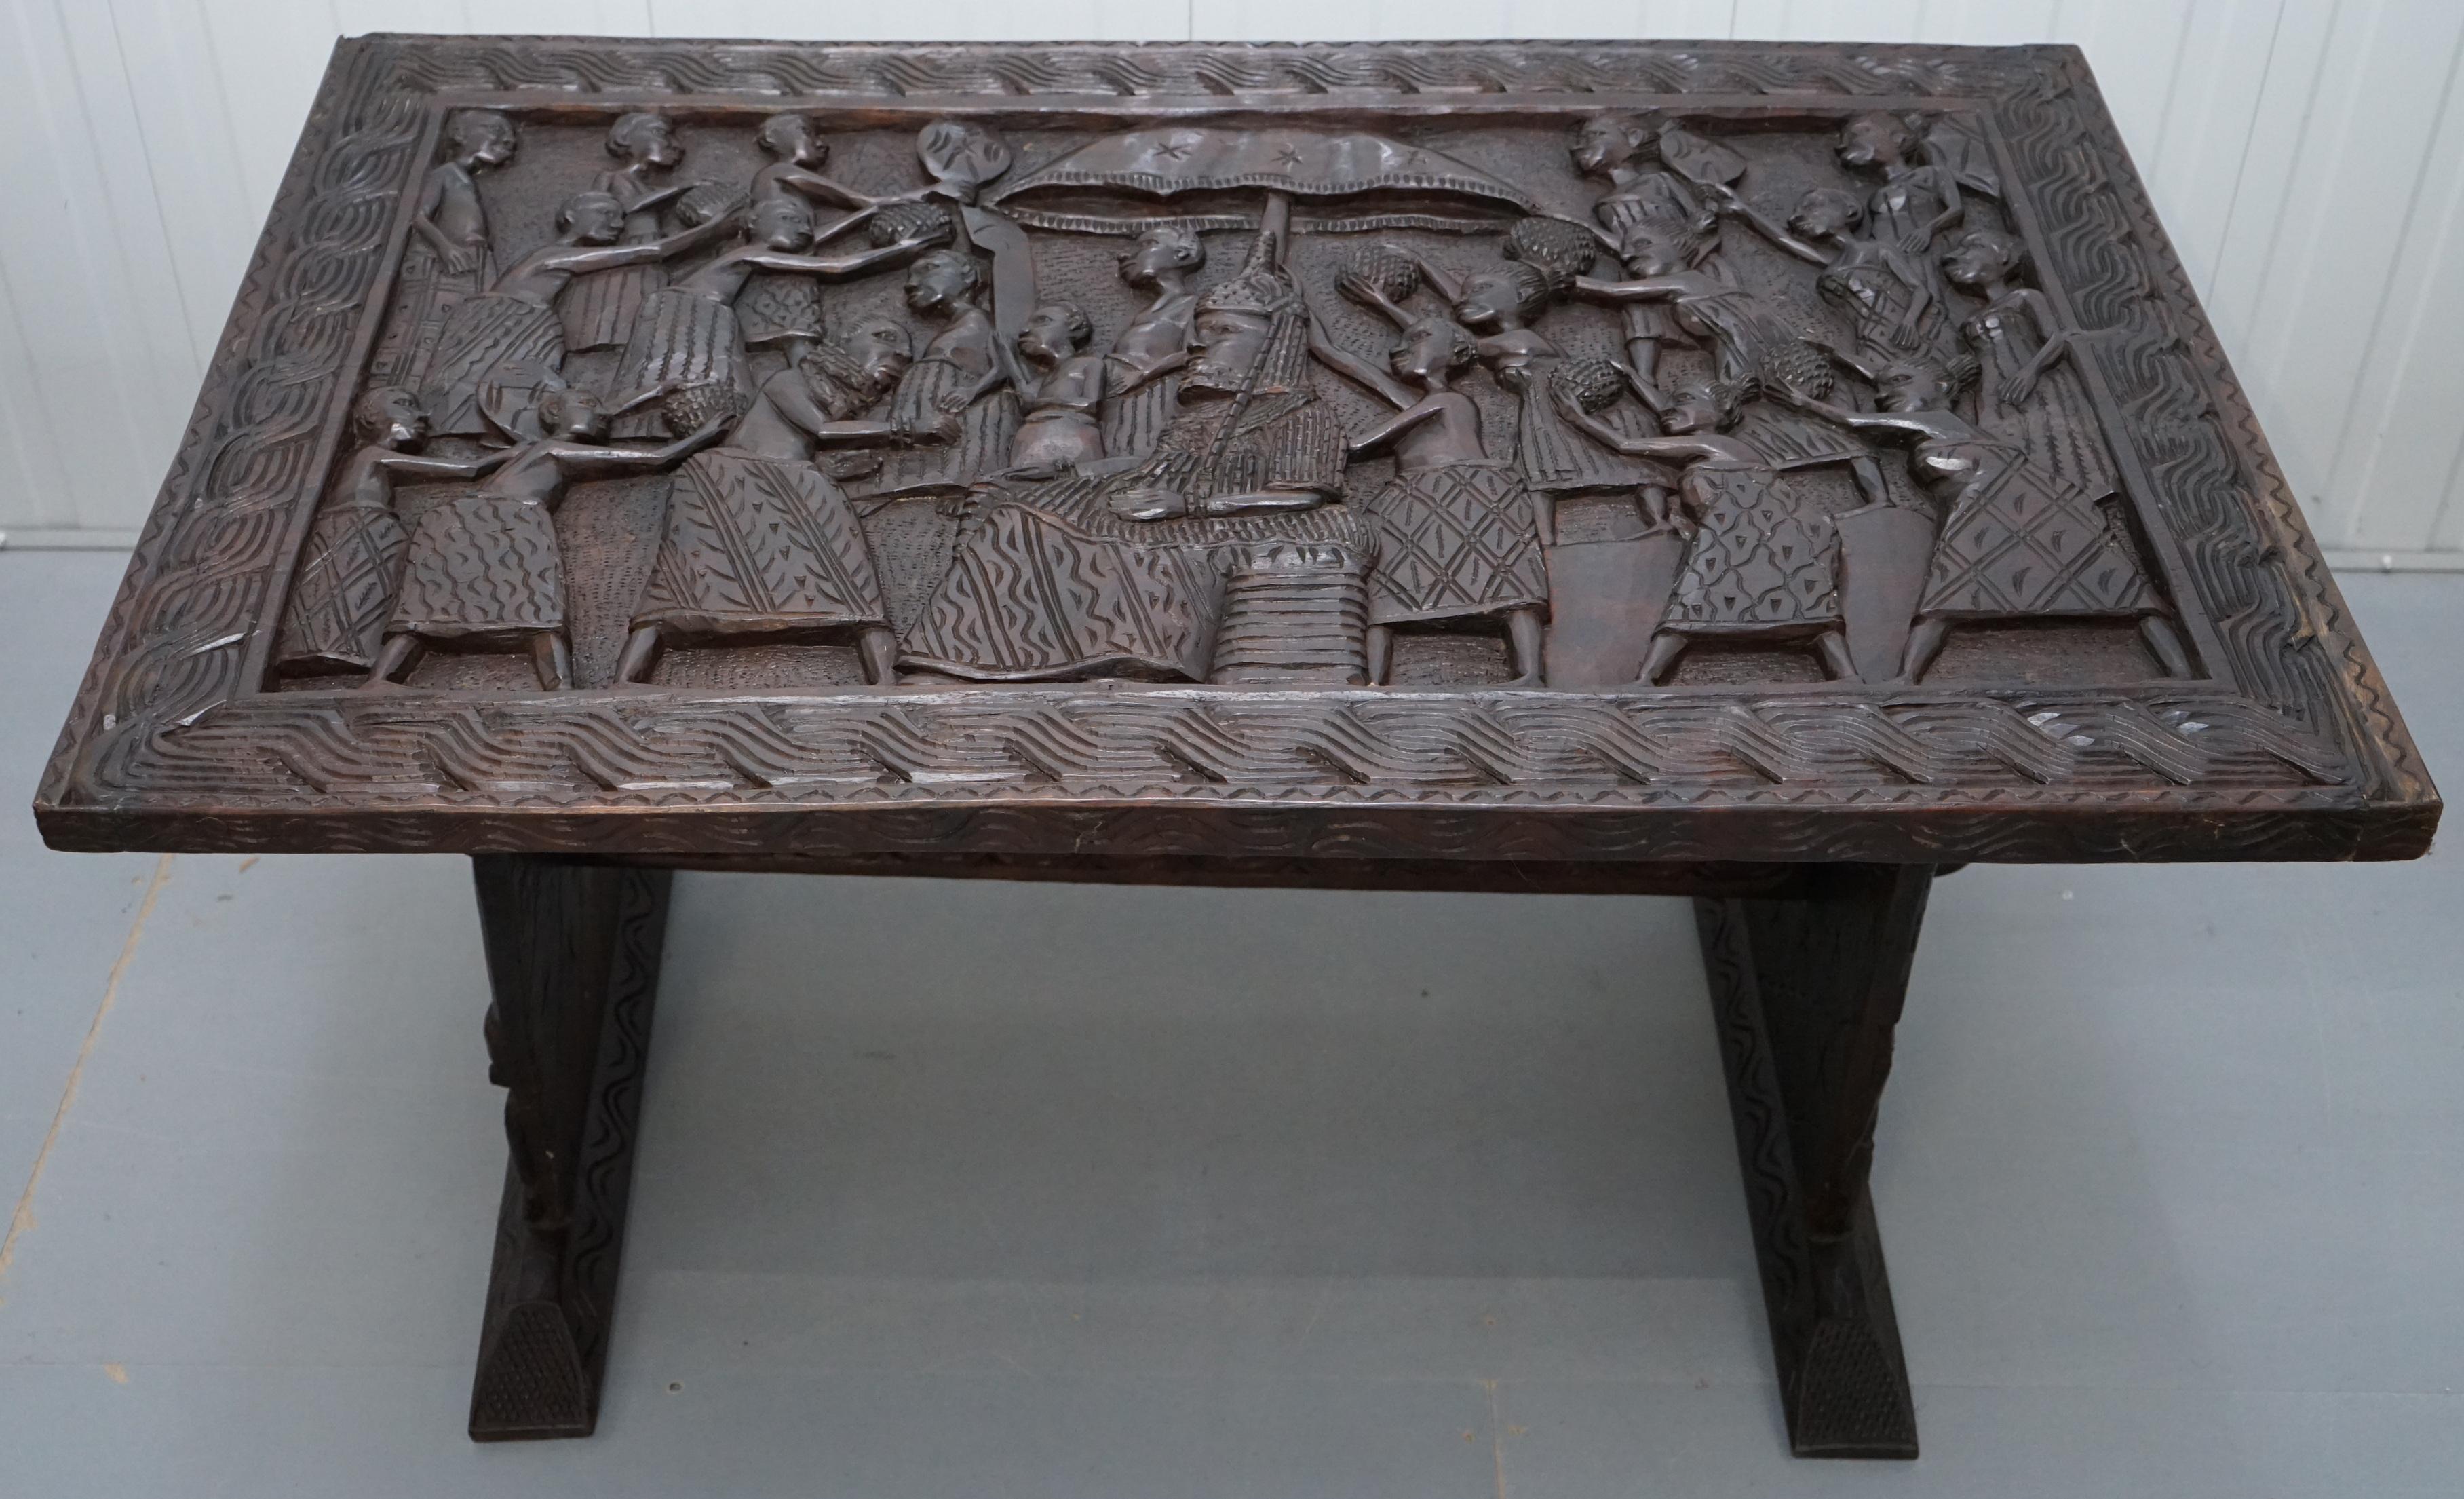 We are delighted to offer for sale this nice hand-carved African wood dining table depicting a Benin and his followers

In terms of condition its used and has patina marks all over, the table is very primitively made and hand carved, as such there